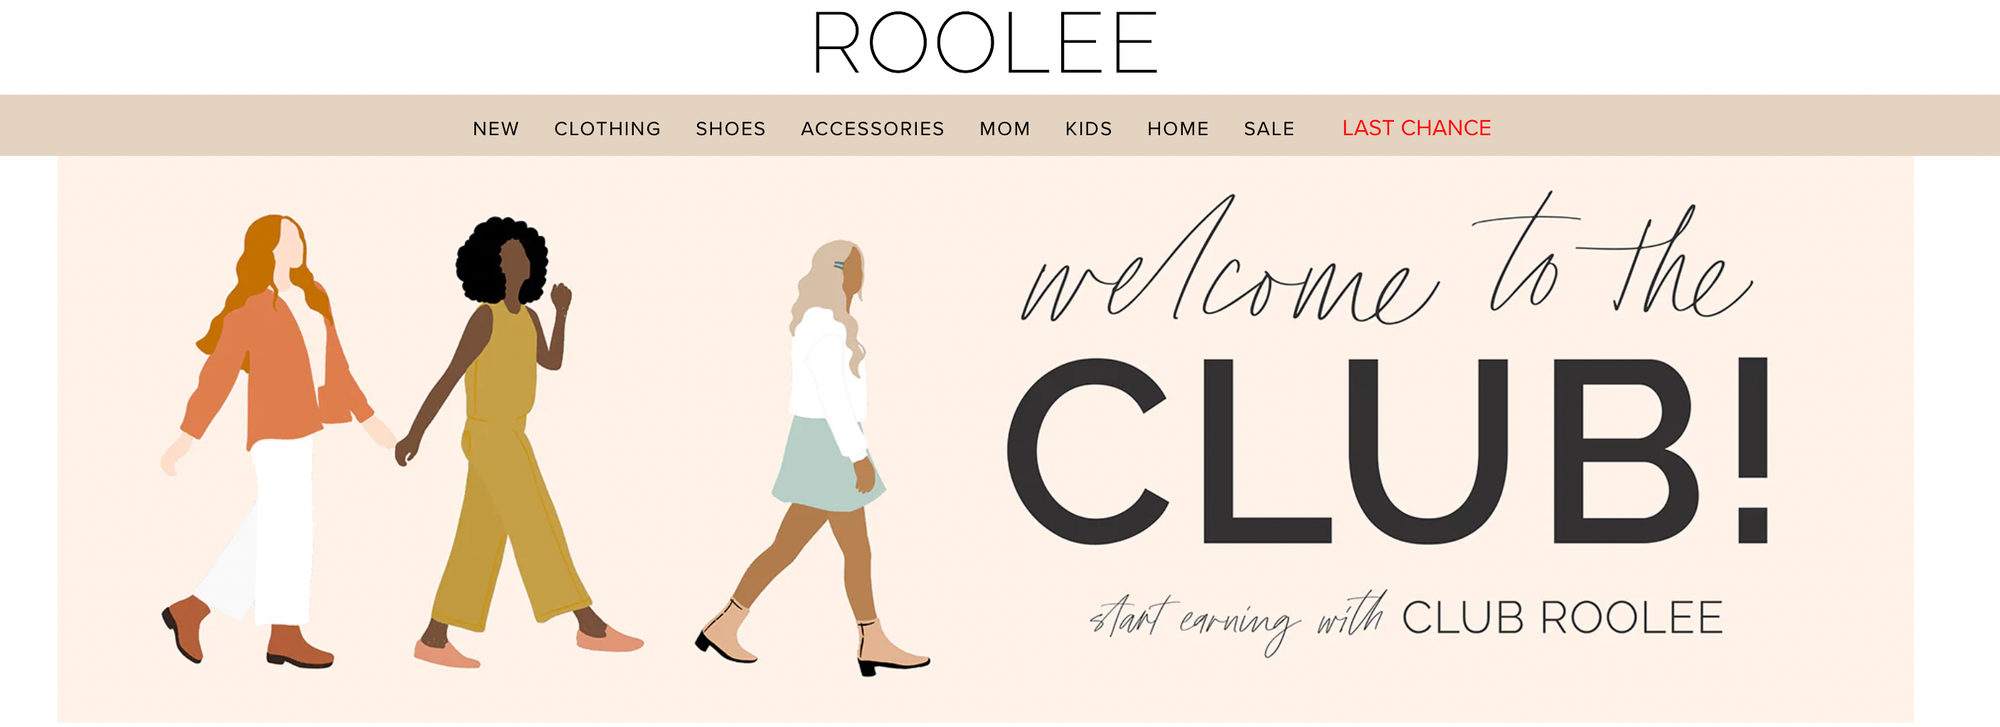 screenshot of ecommerce brand Roolee and its rewards program page